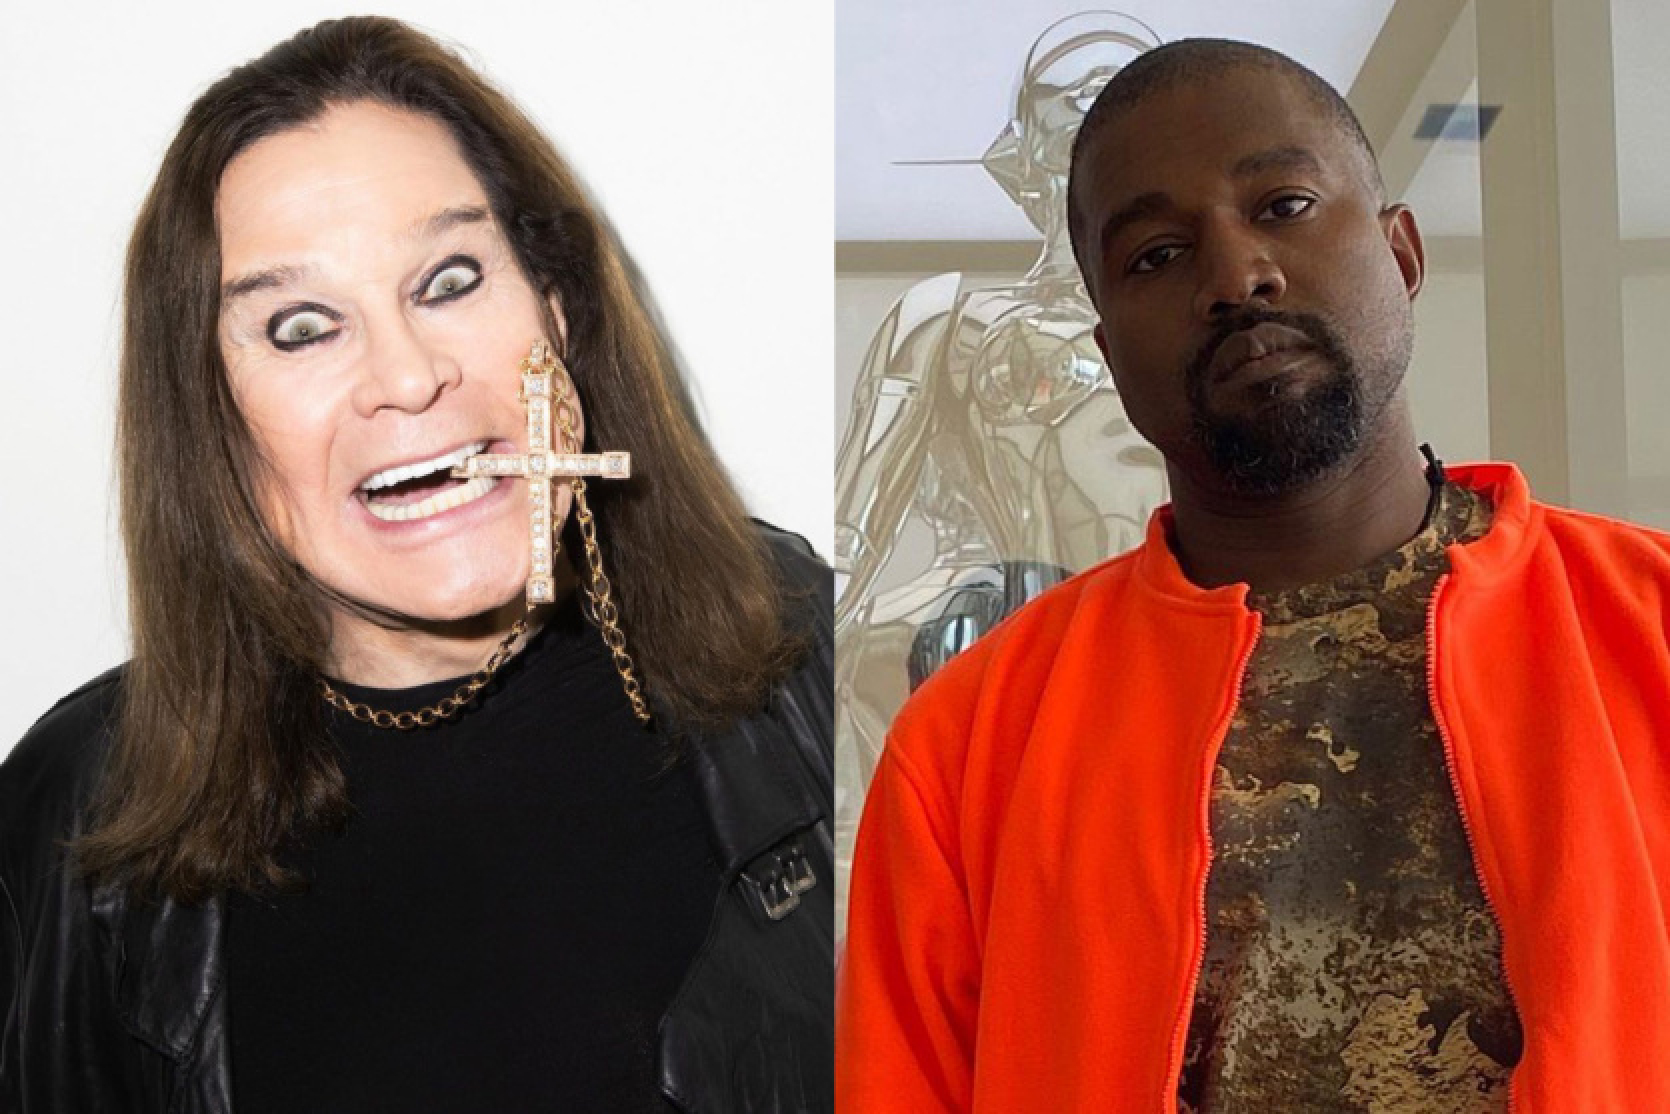 Ozzy Osbourne denied Kanye West a music sample because of anti-Semitism, but the rapper used it